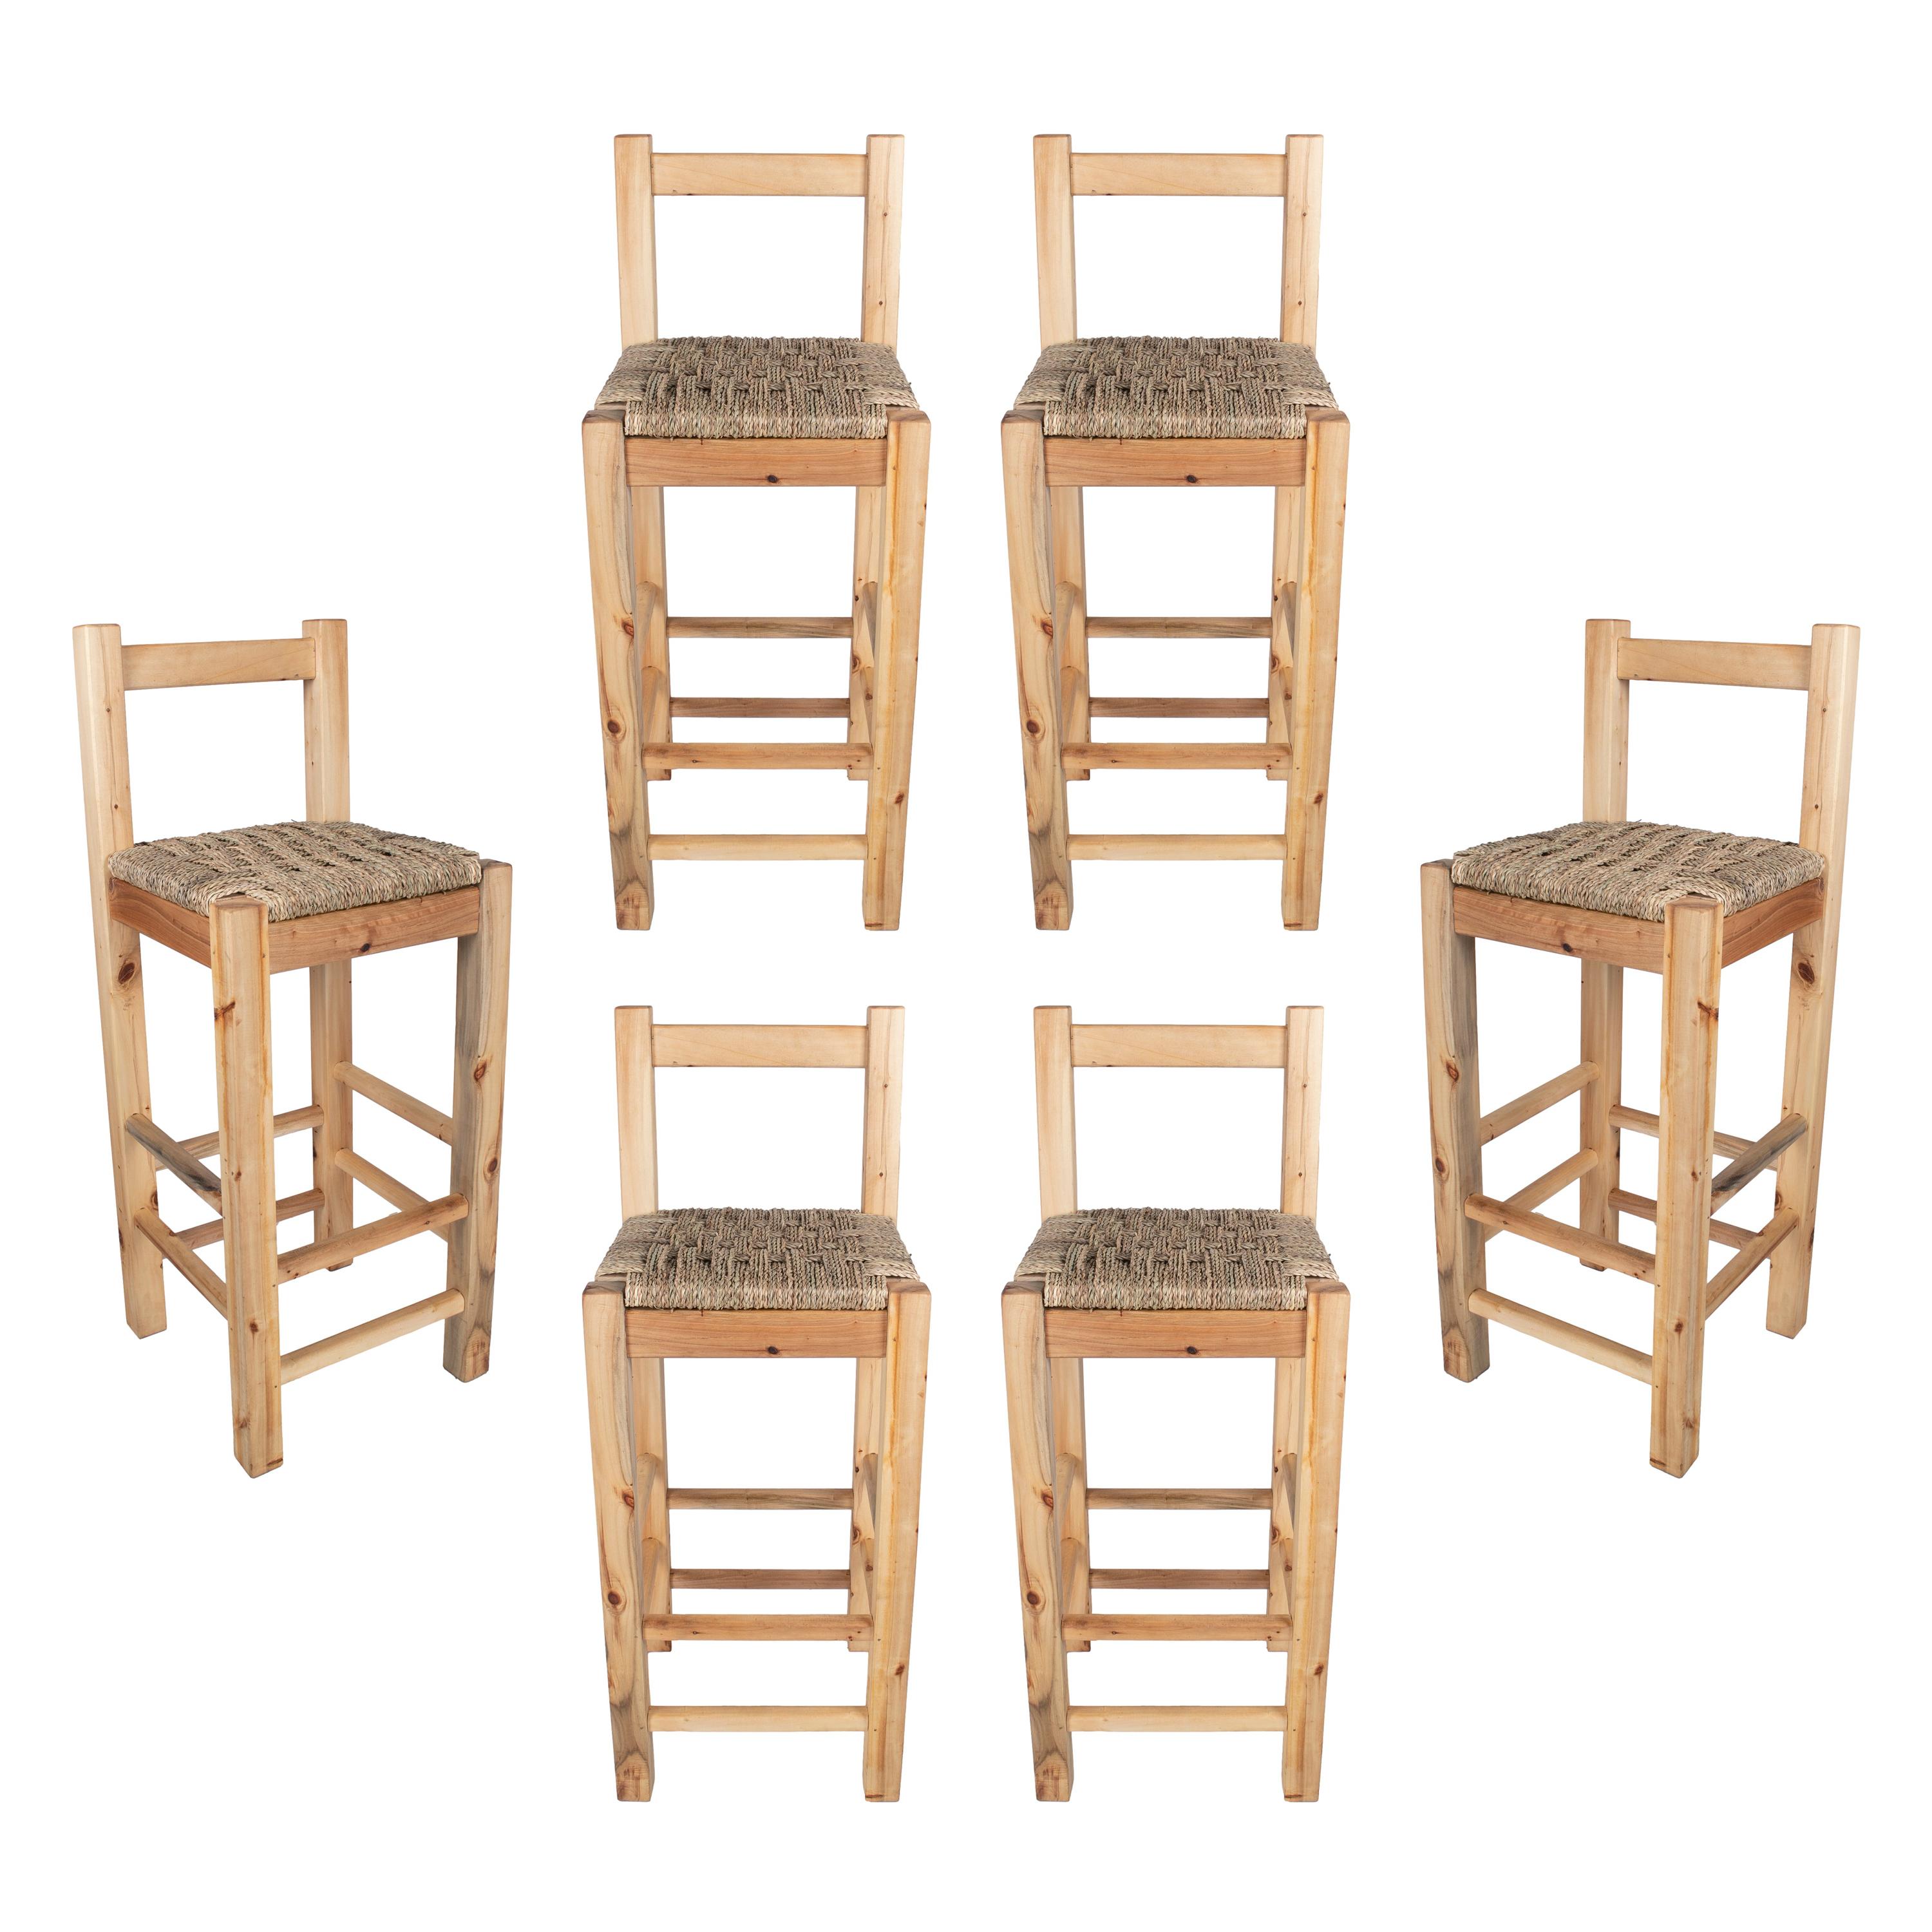 Set of 6 1990s Spanish Wooden Rope Bottomed Stools w/ Backrest